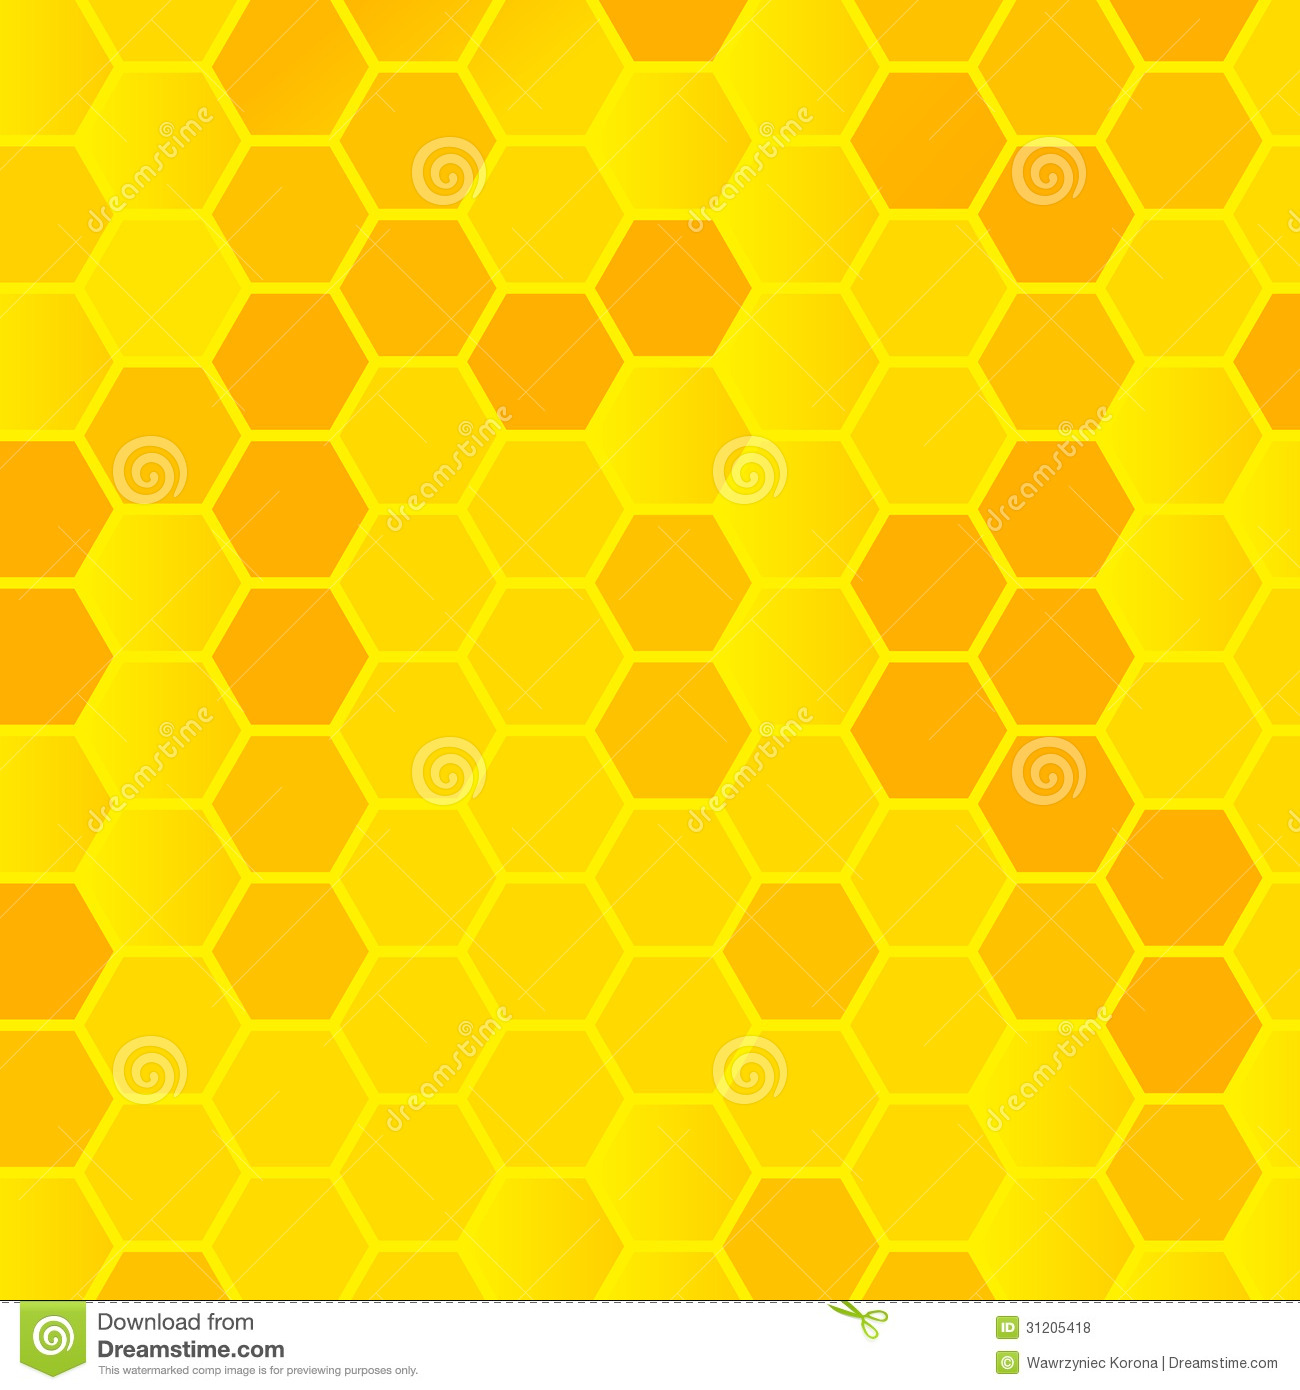 Free Download Yellow Honeycomb Wallpaper Honeycomb Background 1300x1390 For Your Desktop Mobile Tablet Explore 50 Honeycomb Wallpaper Black Honeycomb Wallpaper Blue Honeycomb Wallpaper Honeycomb Wallpaper Windows 8